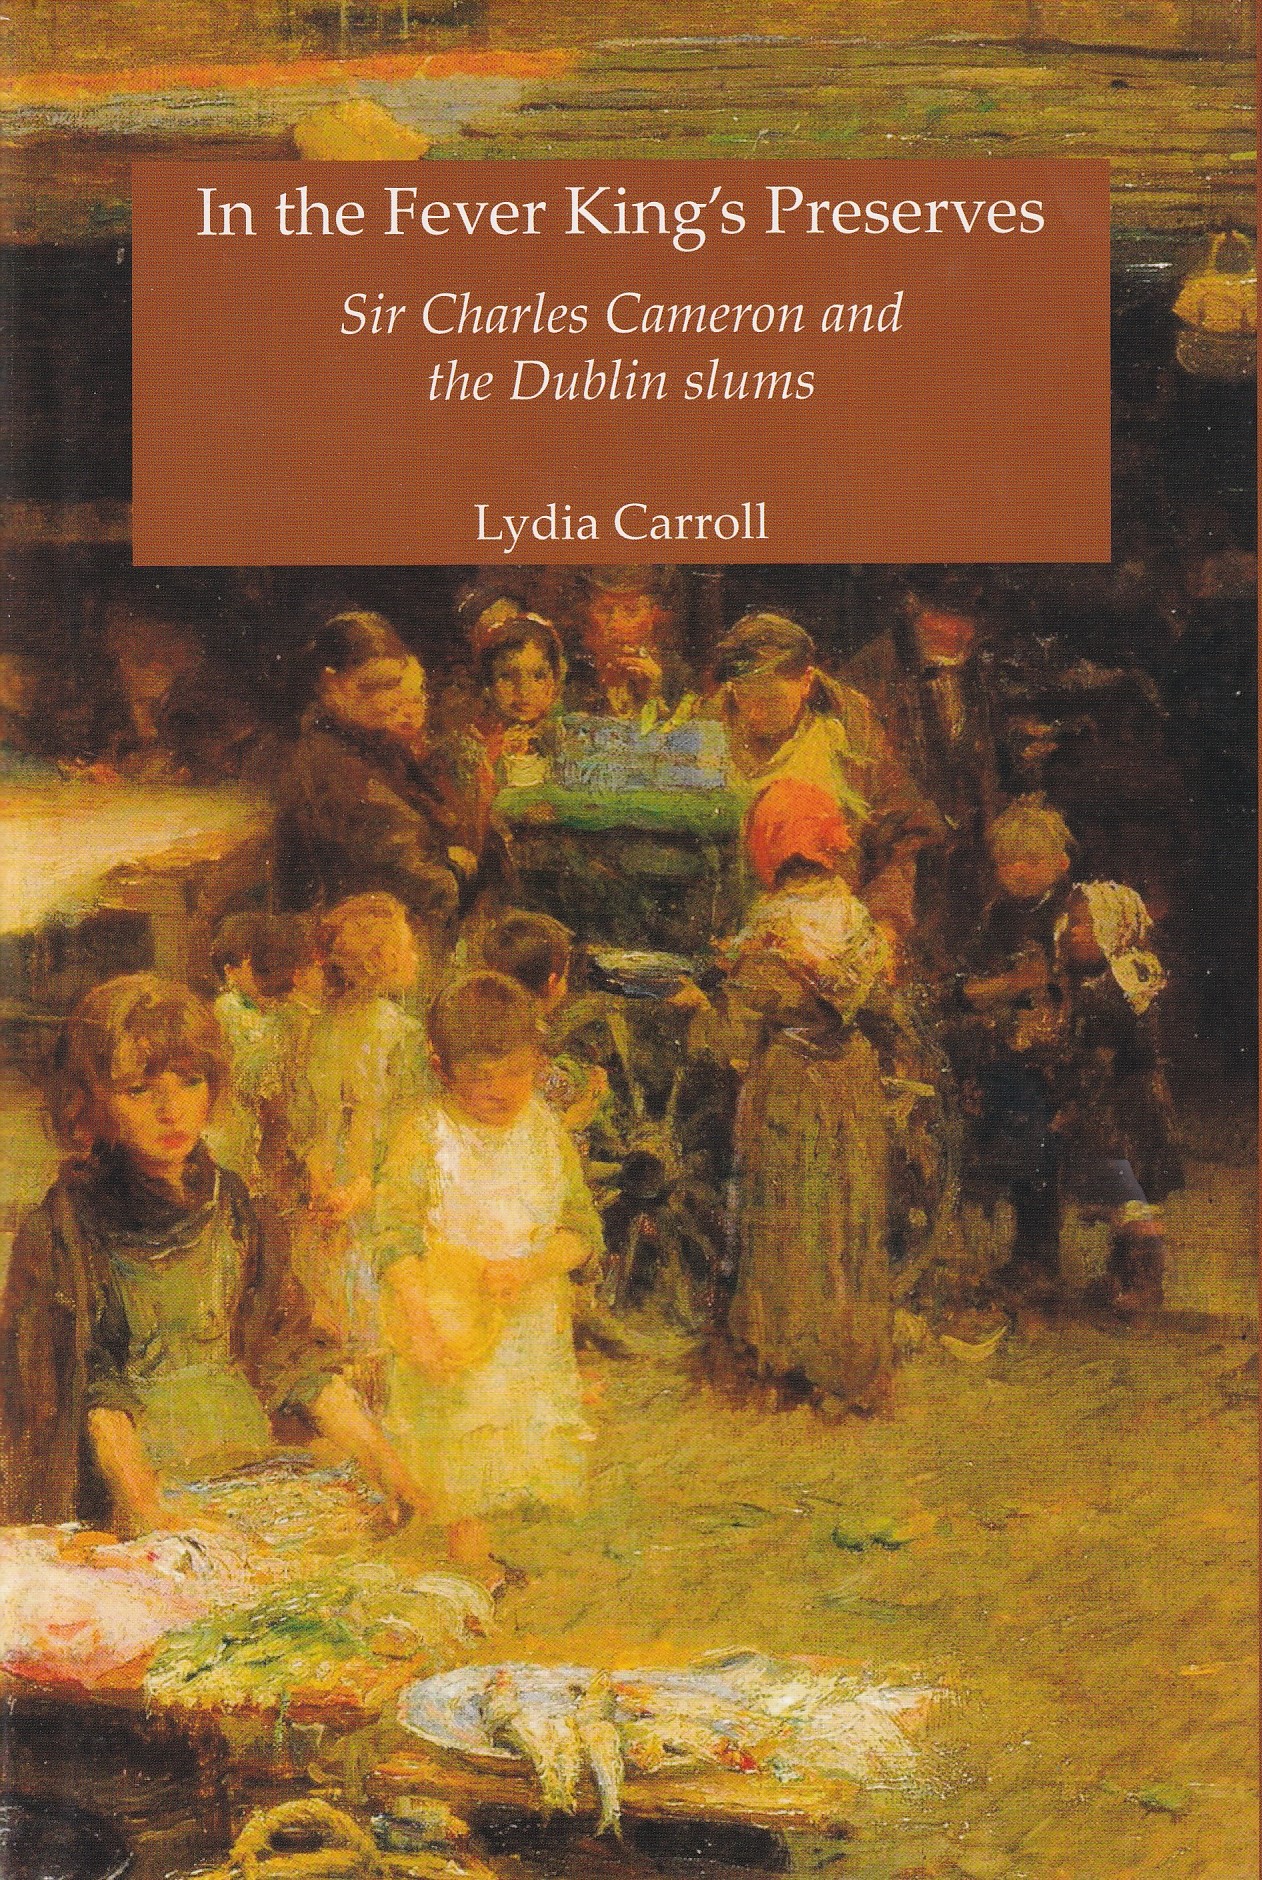 In the Fever King’s Preserves: Sir Charles Cameron and the Dublin slums by Lydia Carroll